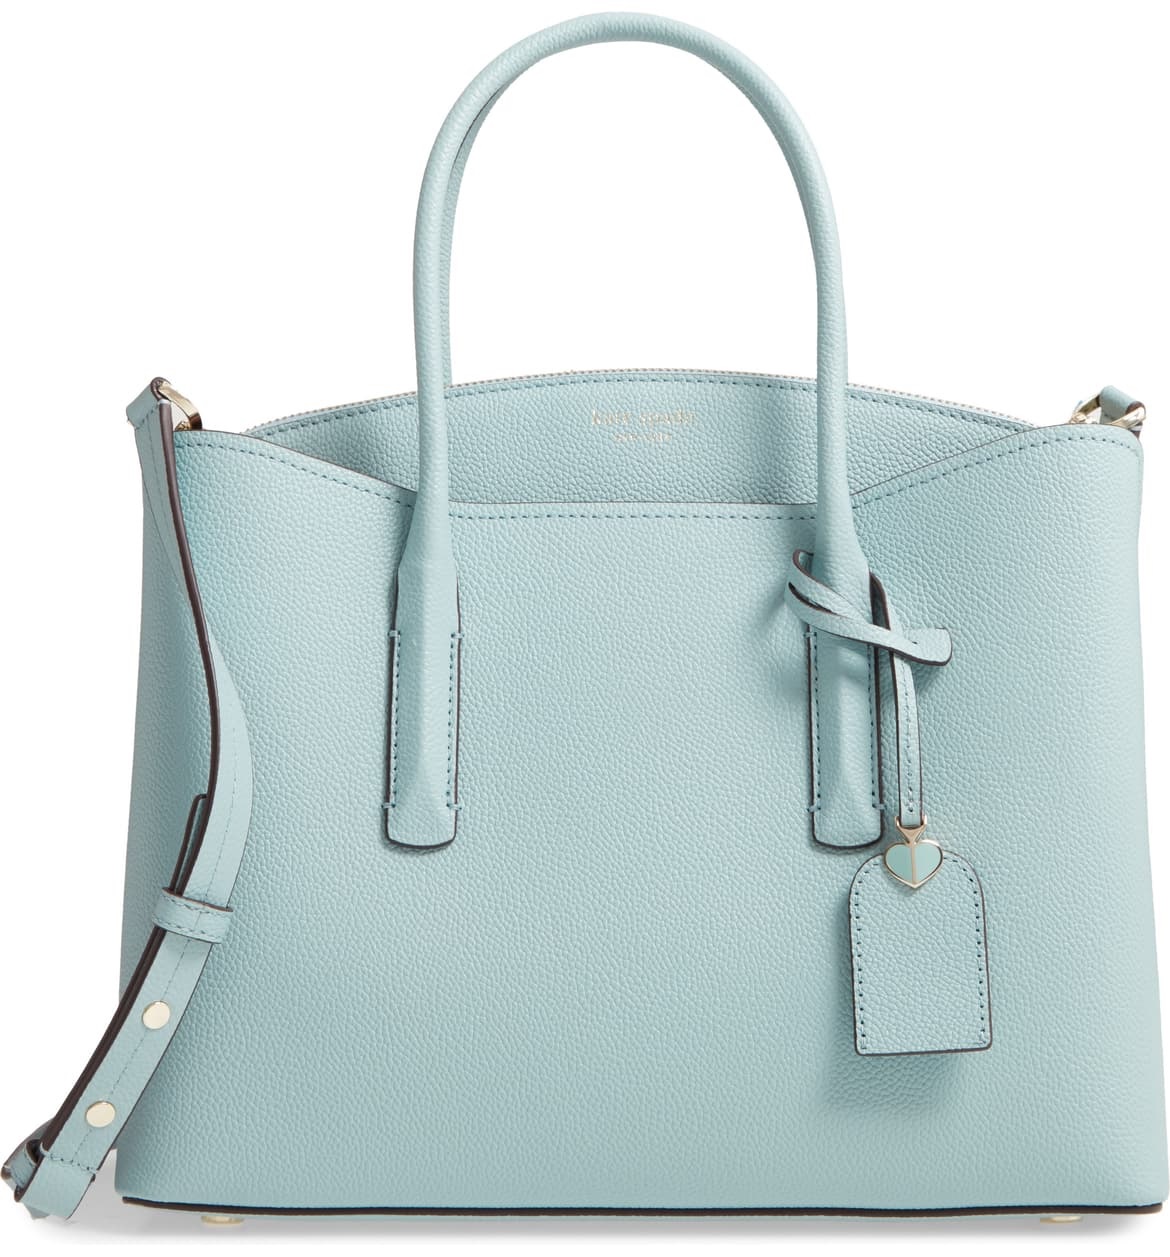 kate spade tote on the nordstrom winter sale